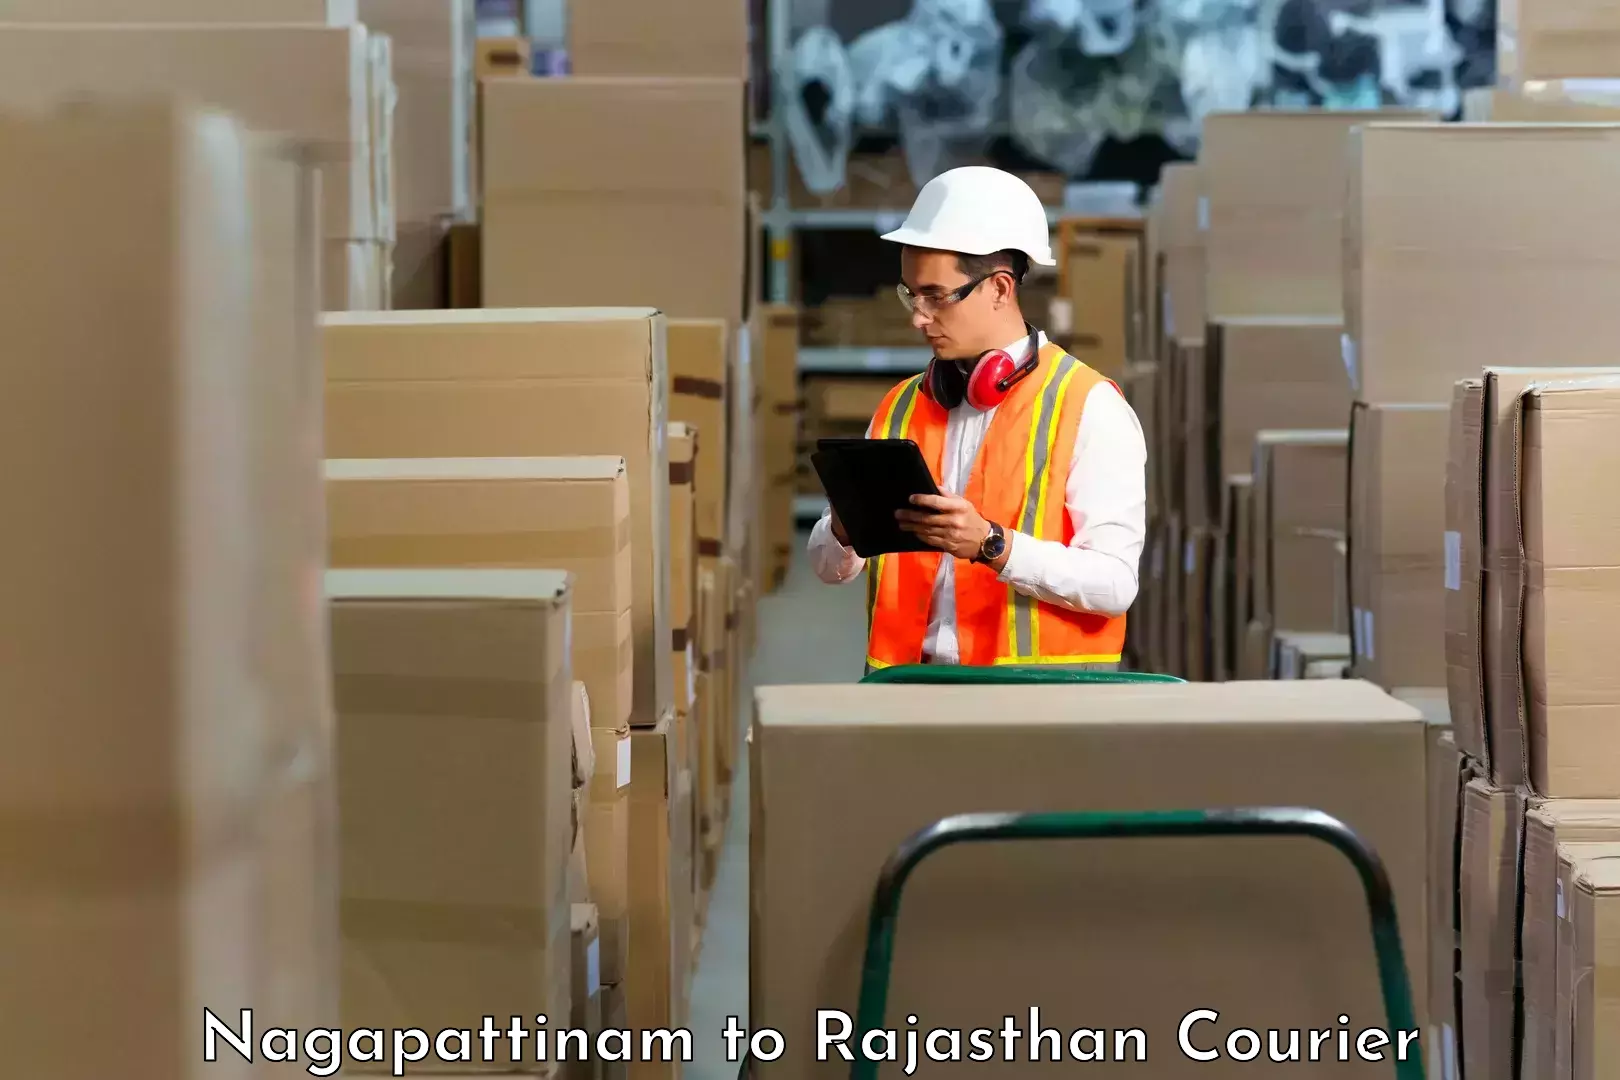 State-of-the-art courier technology Nagapattinam to Pali